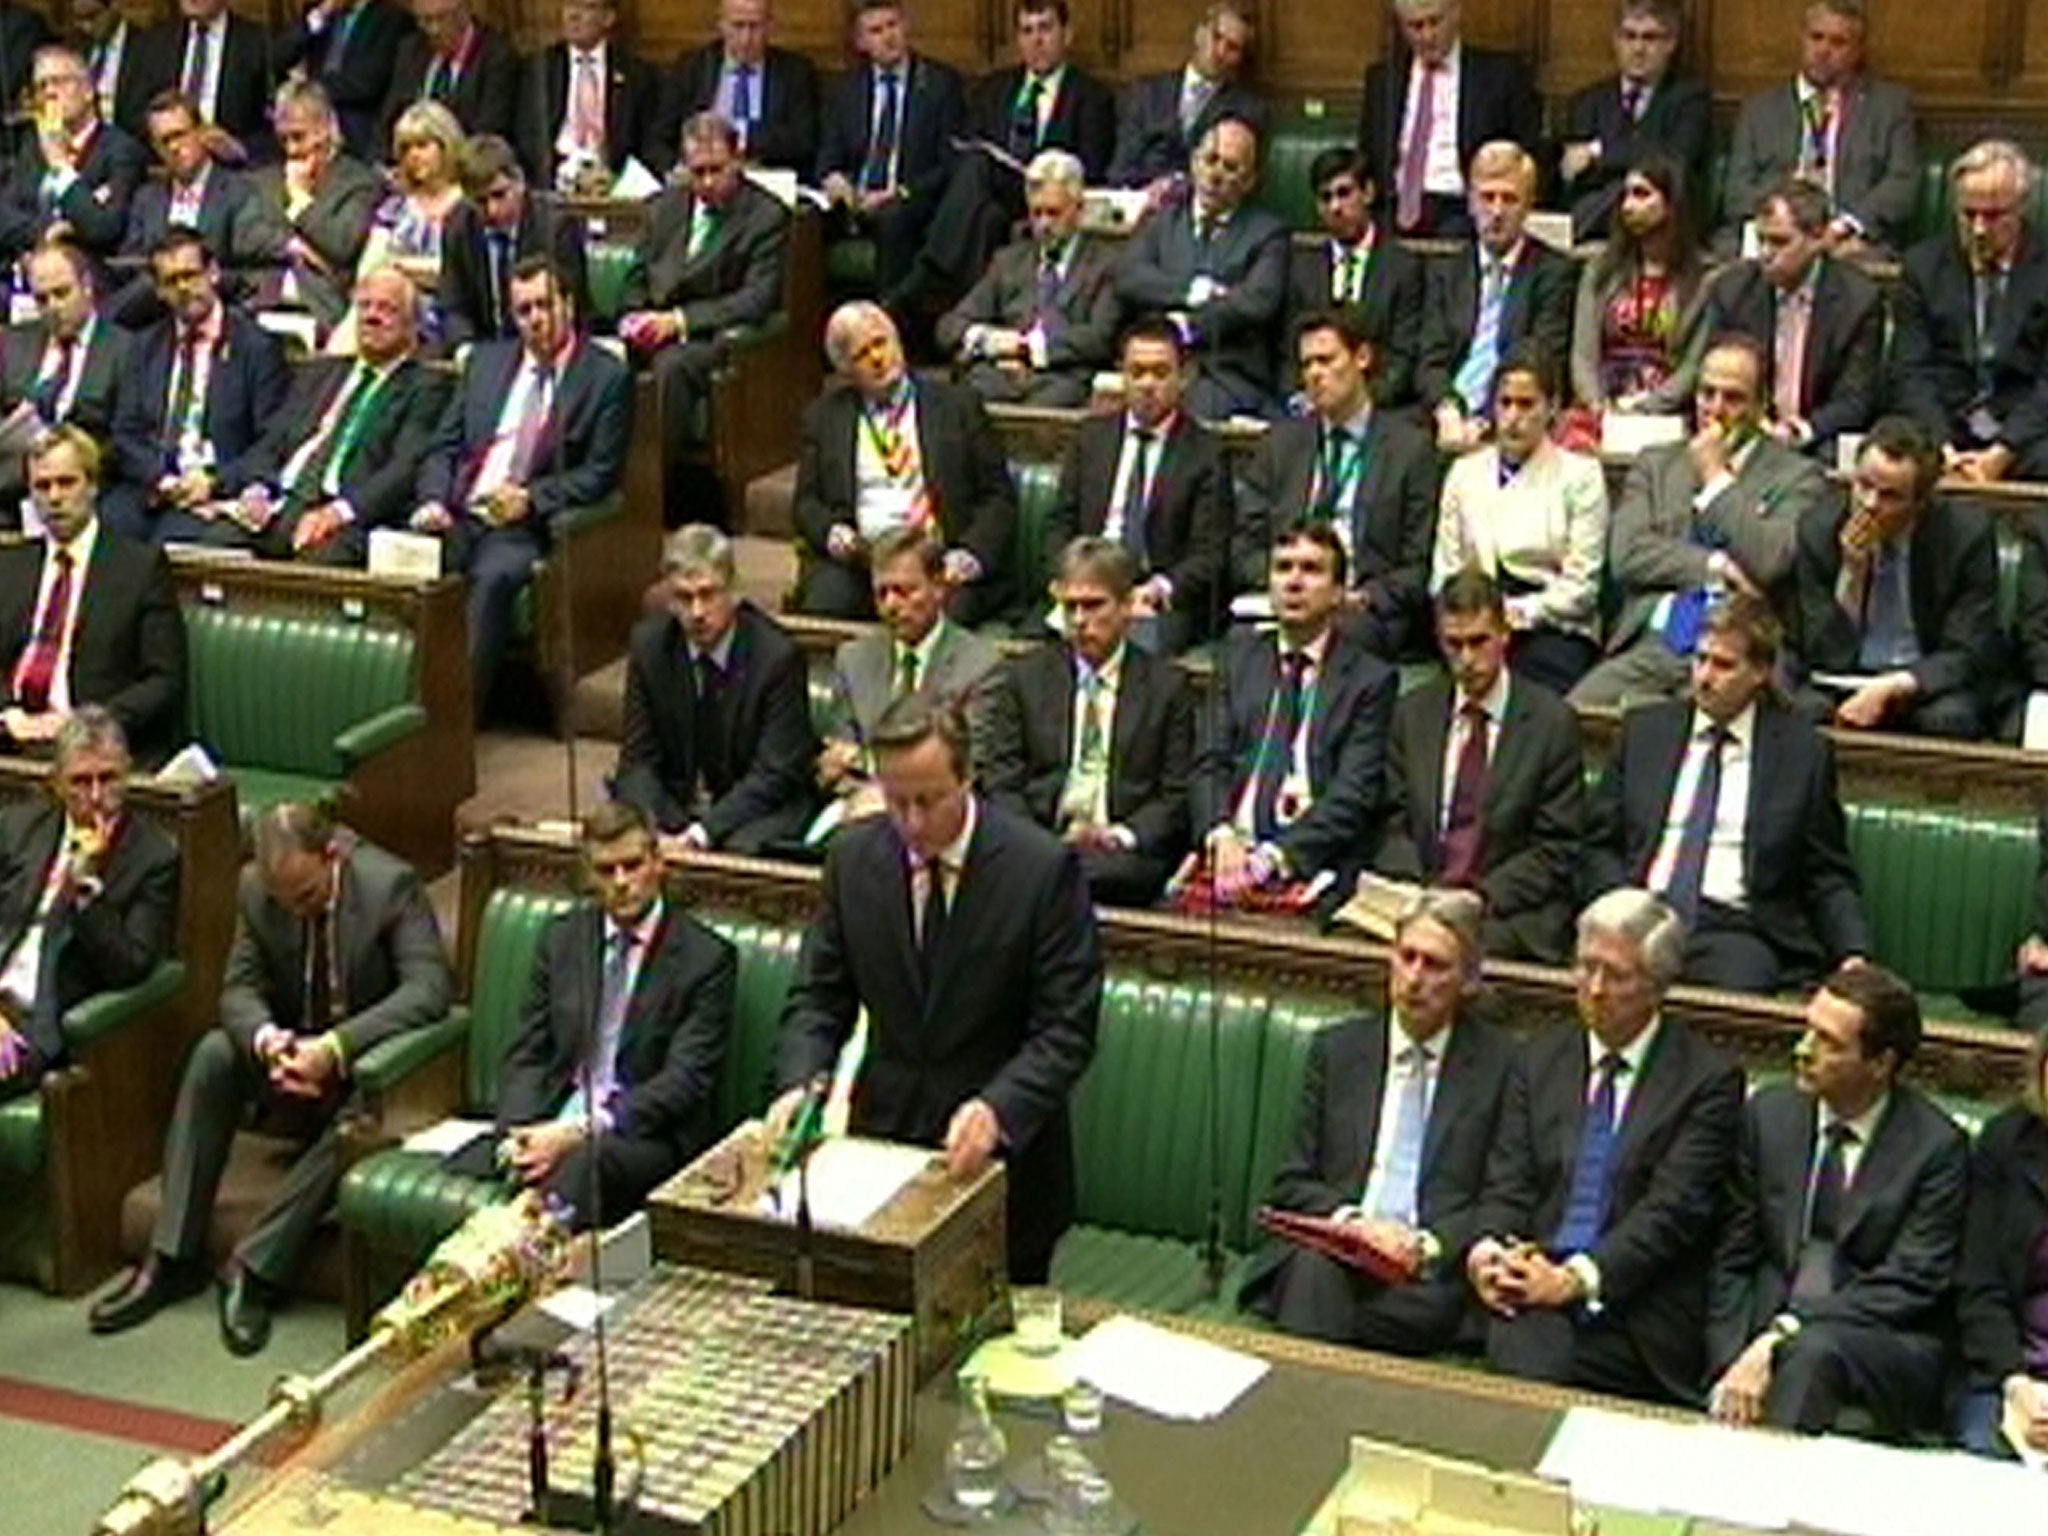 Prime Minister David Cameron issues a statement in the House of Commons on the terror attack in Sousse, Tunisia